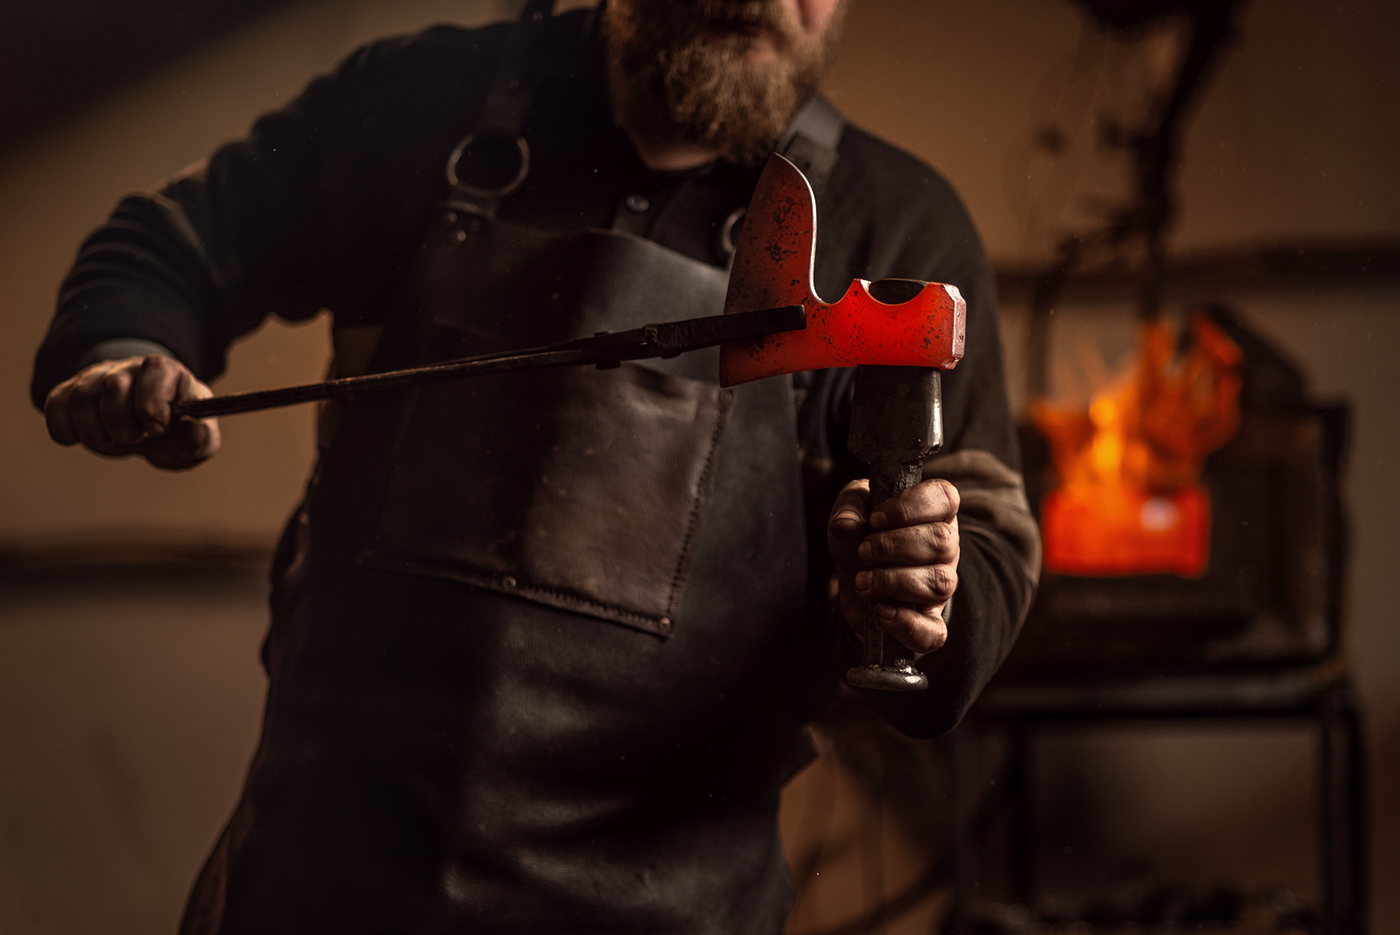 smithy iron fire man Production portrait hands leather manufacture axe